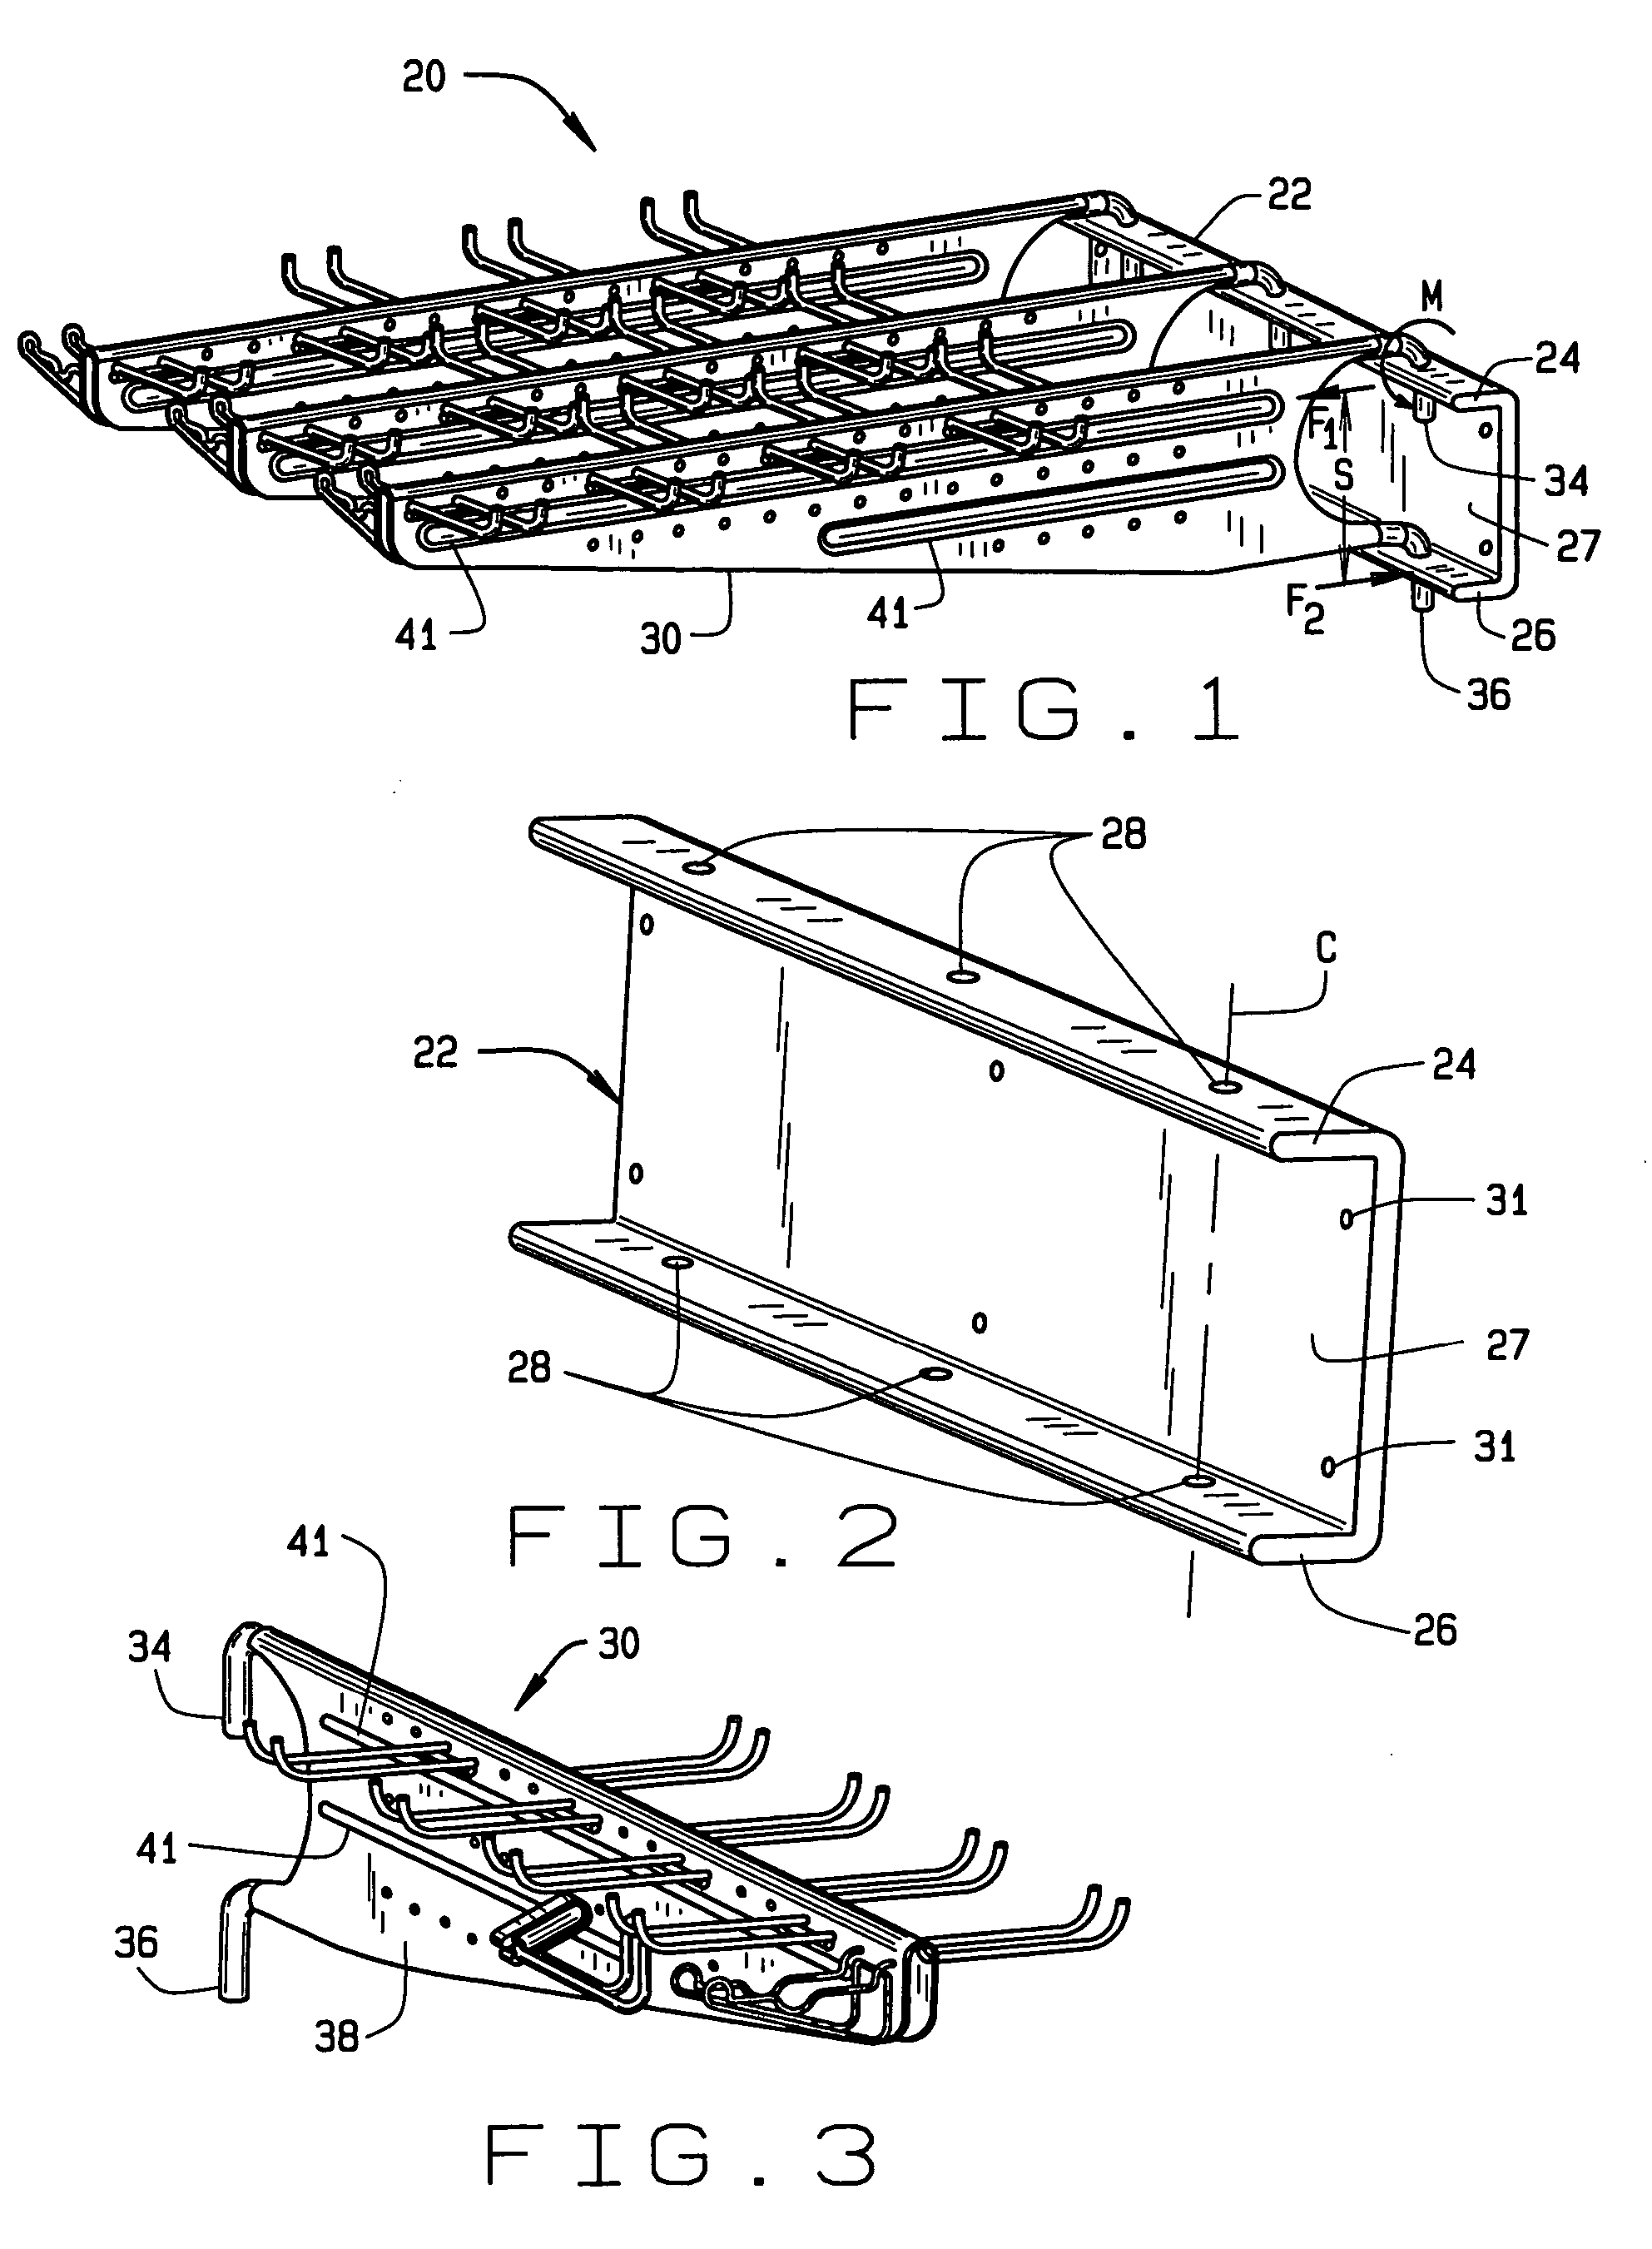 Racks having swivel arms for supporting tools